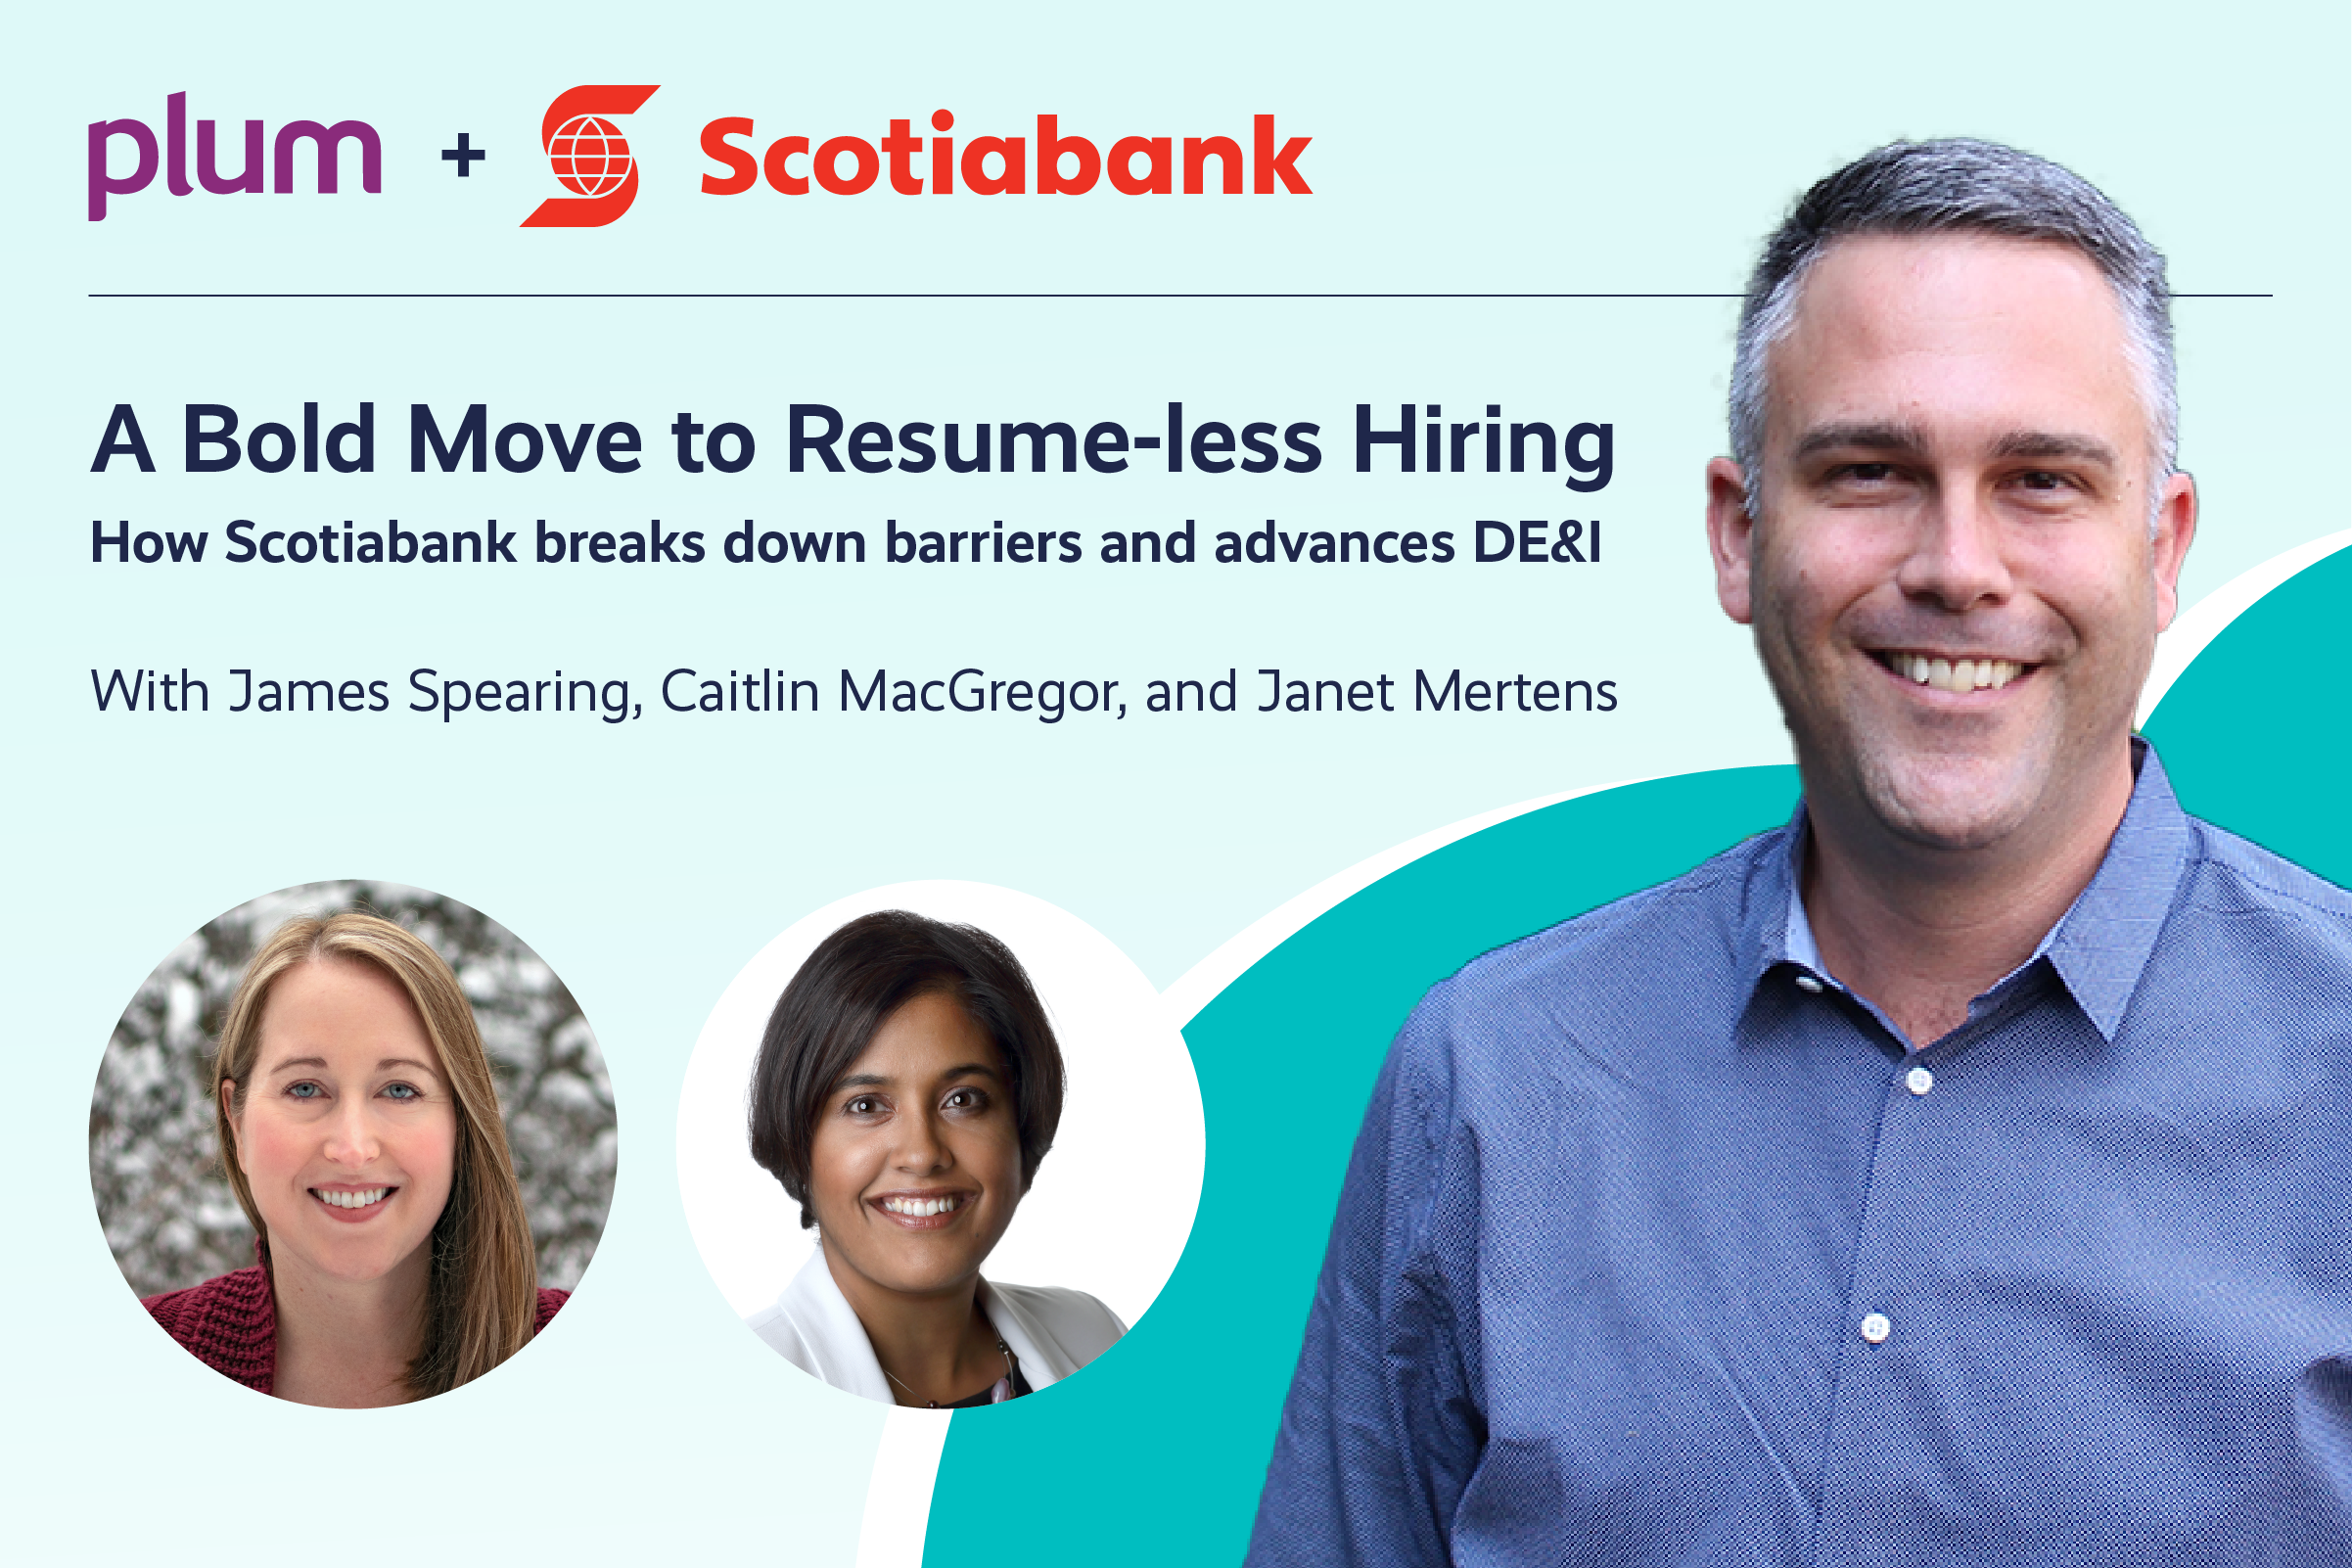 A Bold Move to Resume-less Hiring: How Scotiabank breaks down barriers and advances DE&I